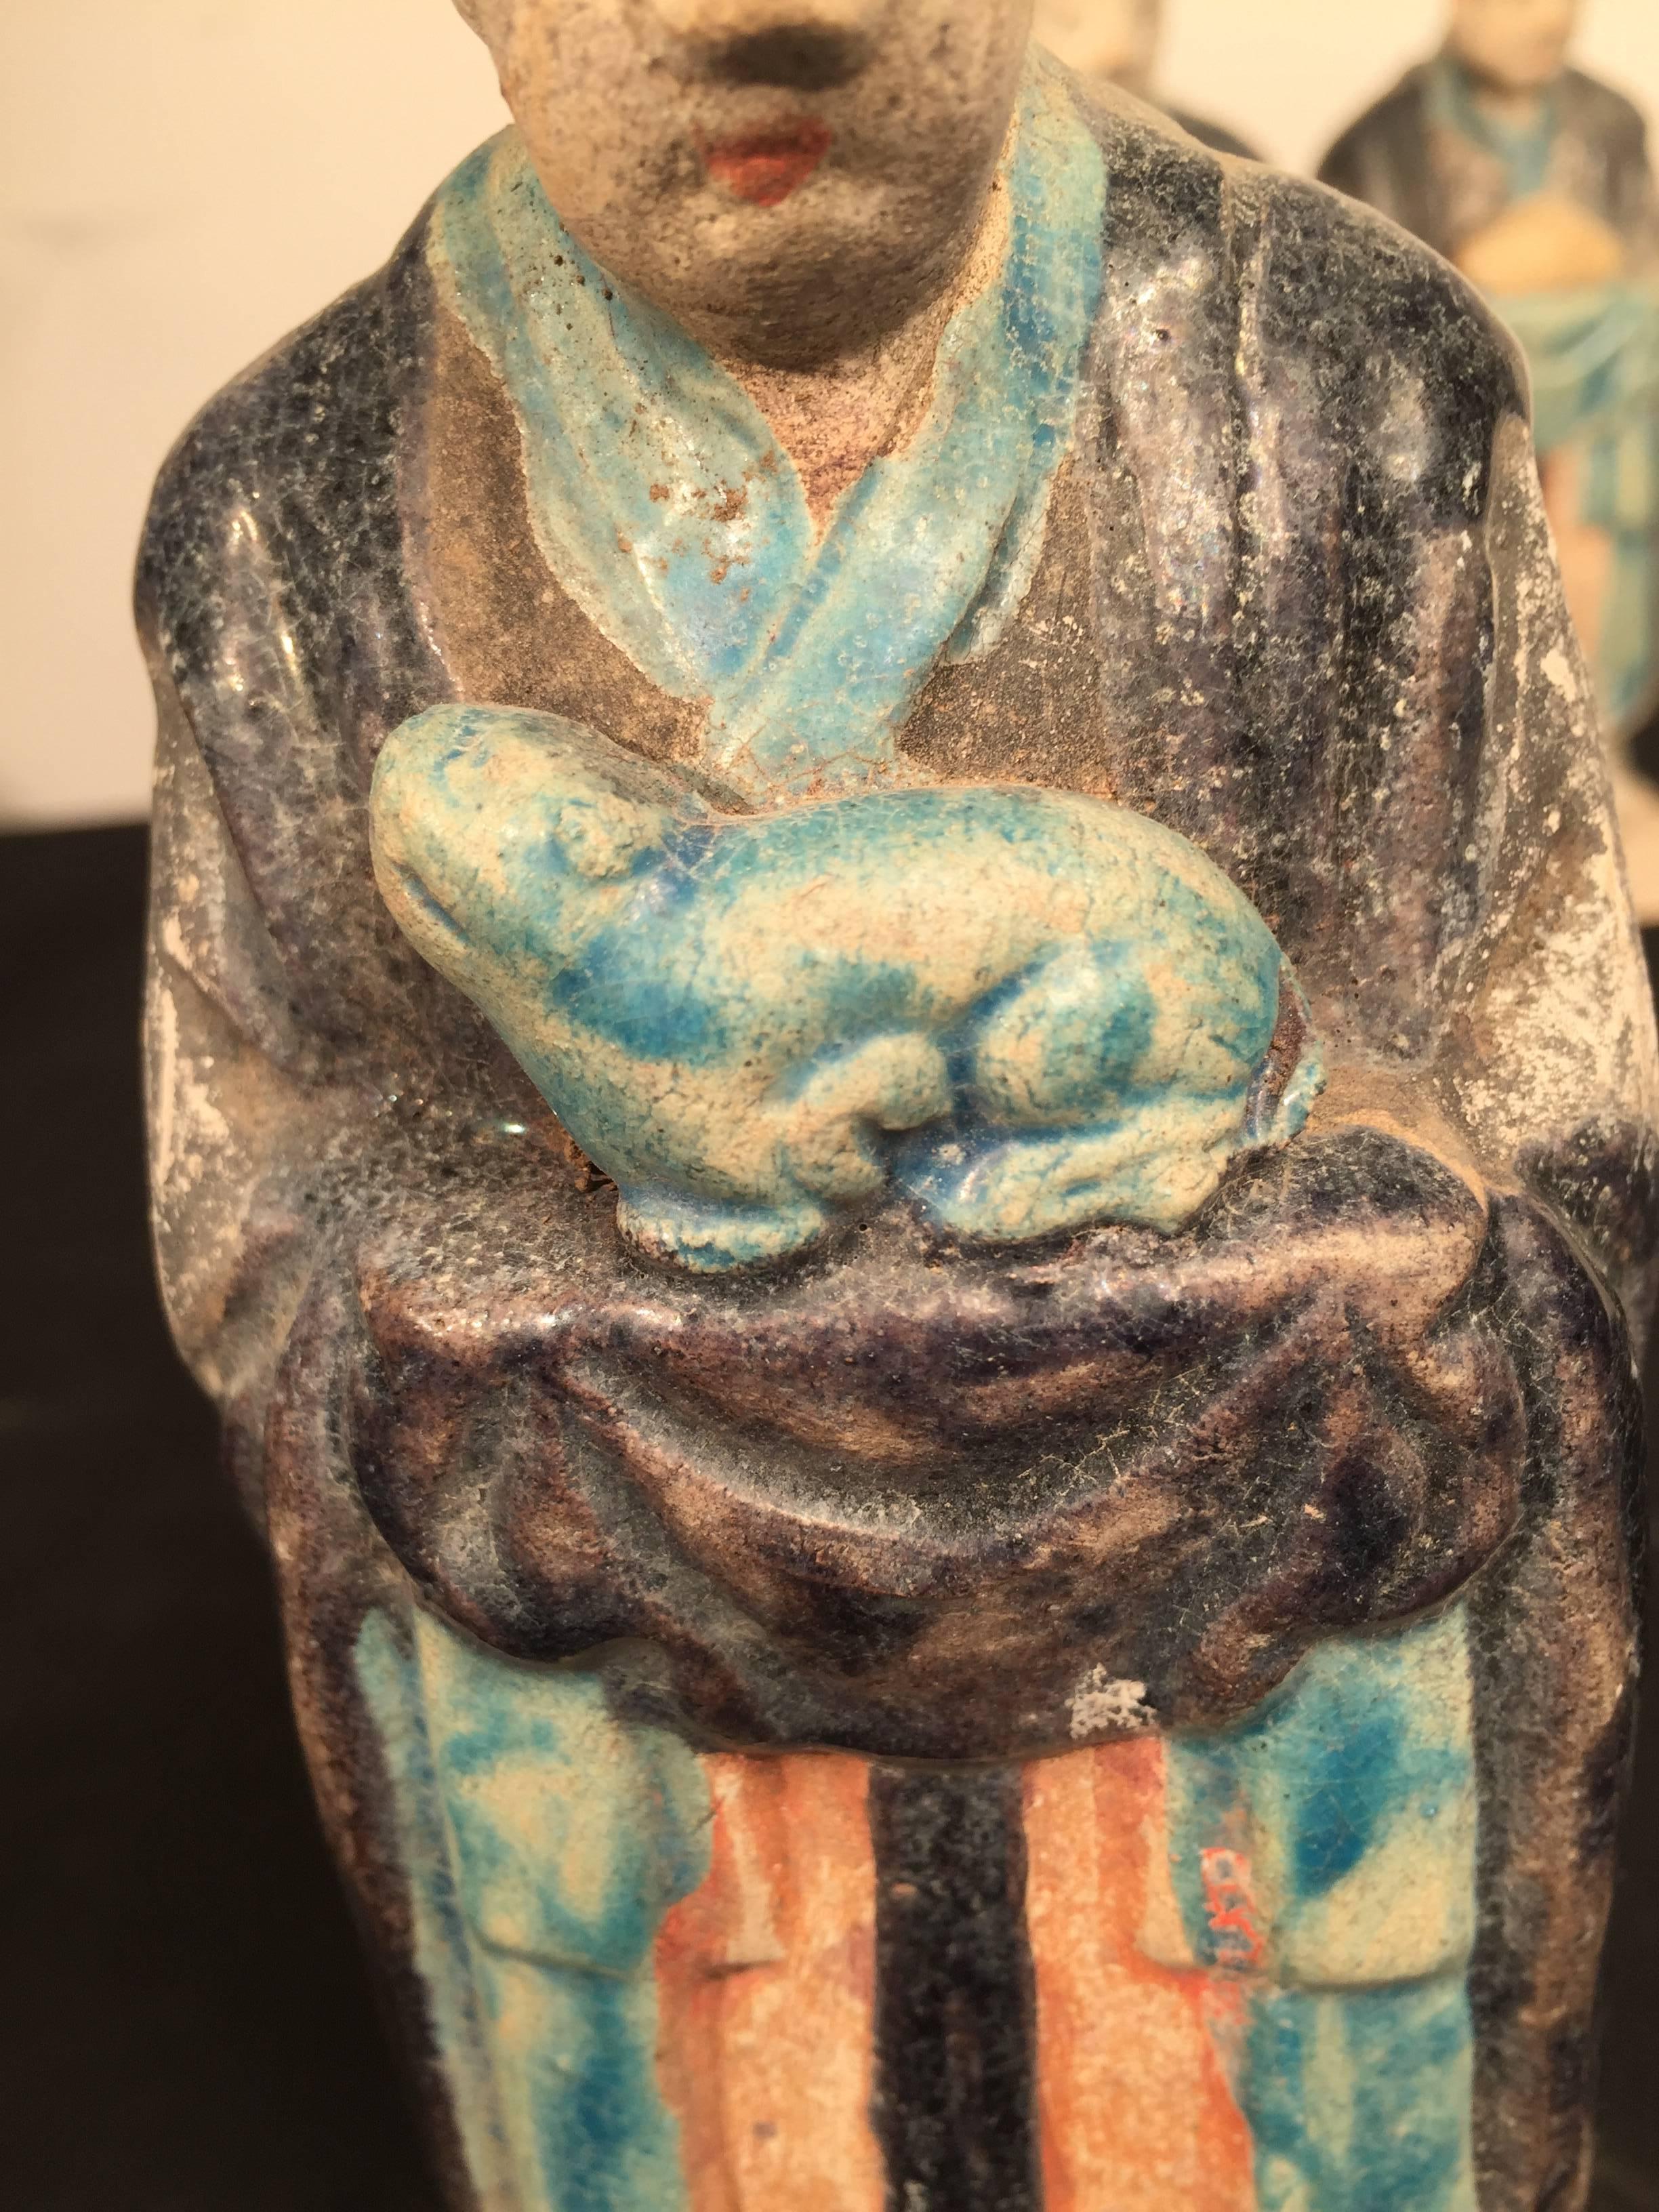 Glazed Important Ancient Chinese Zodiac Figure Holding a Tiger, Ming Dynasty 1368-1644